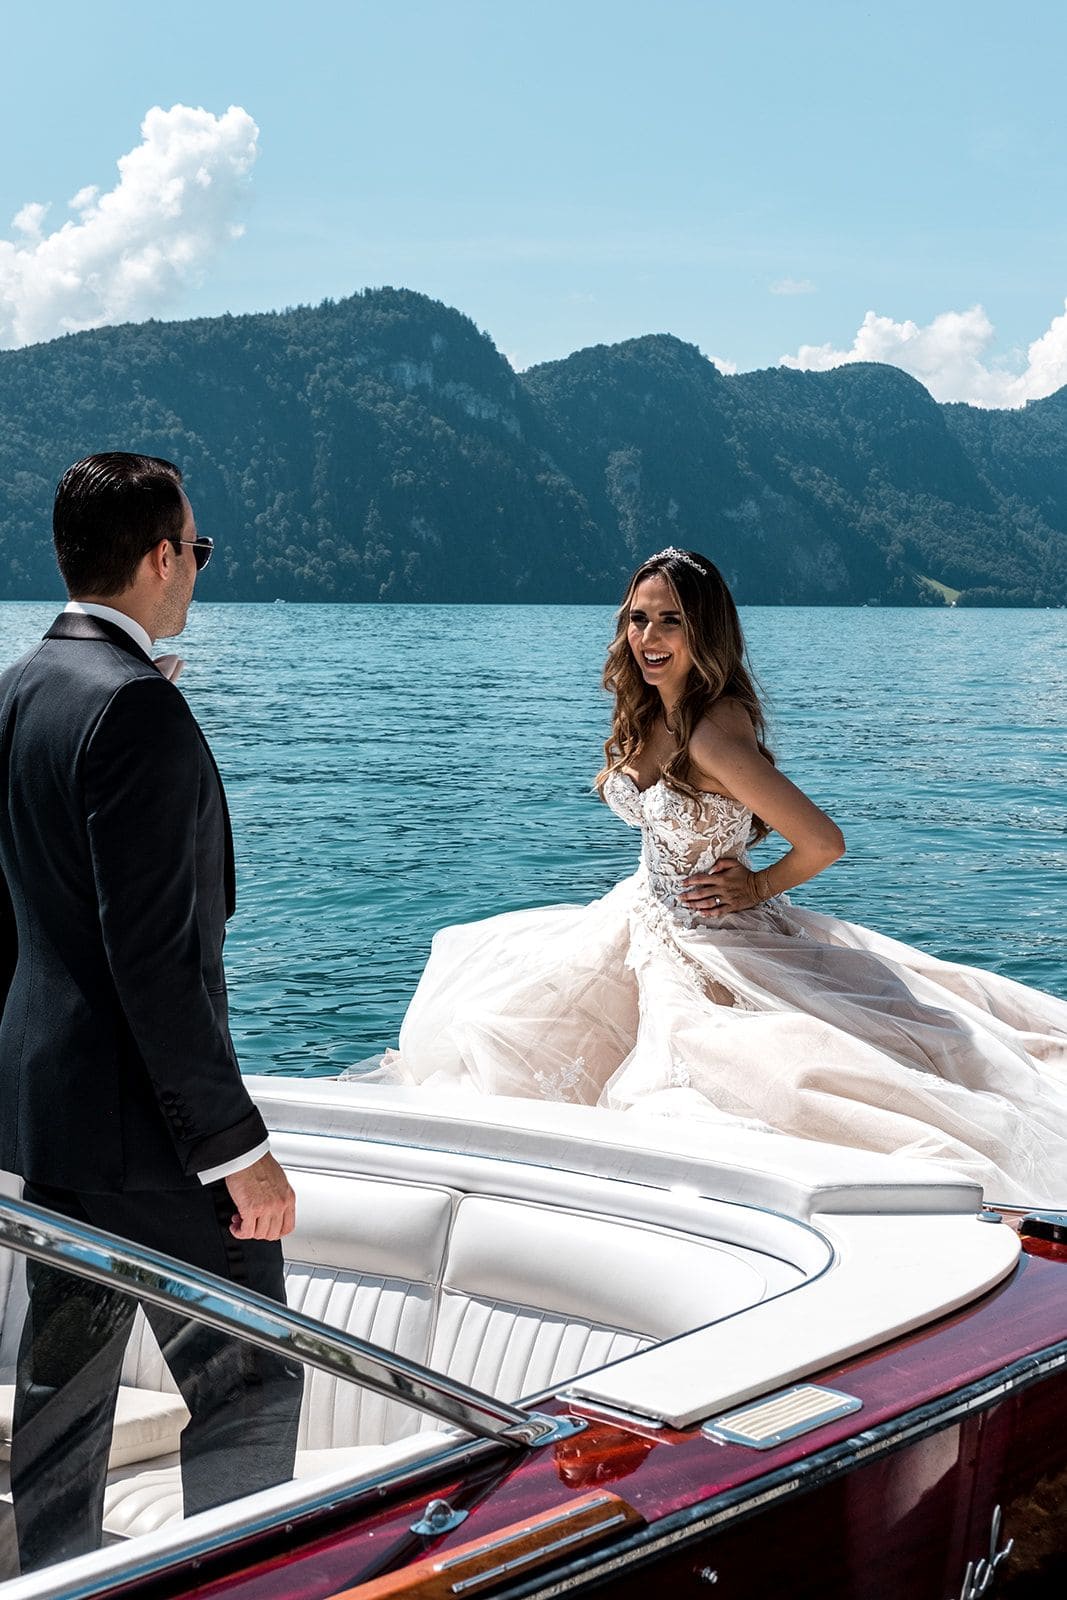 Bride and groom on a boat on Lake Lucerne, Switzerland